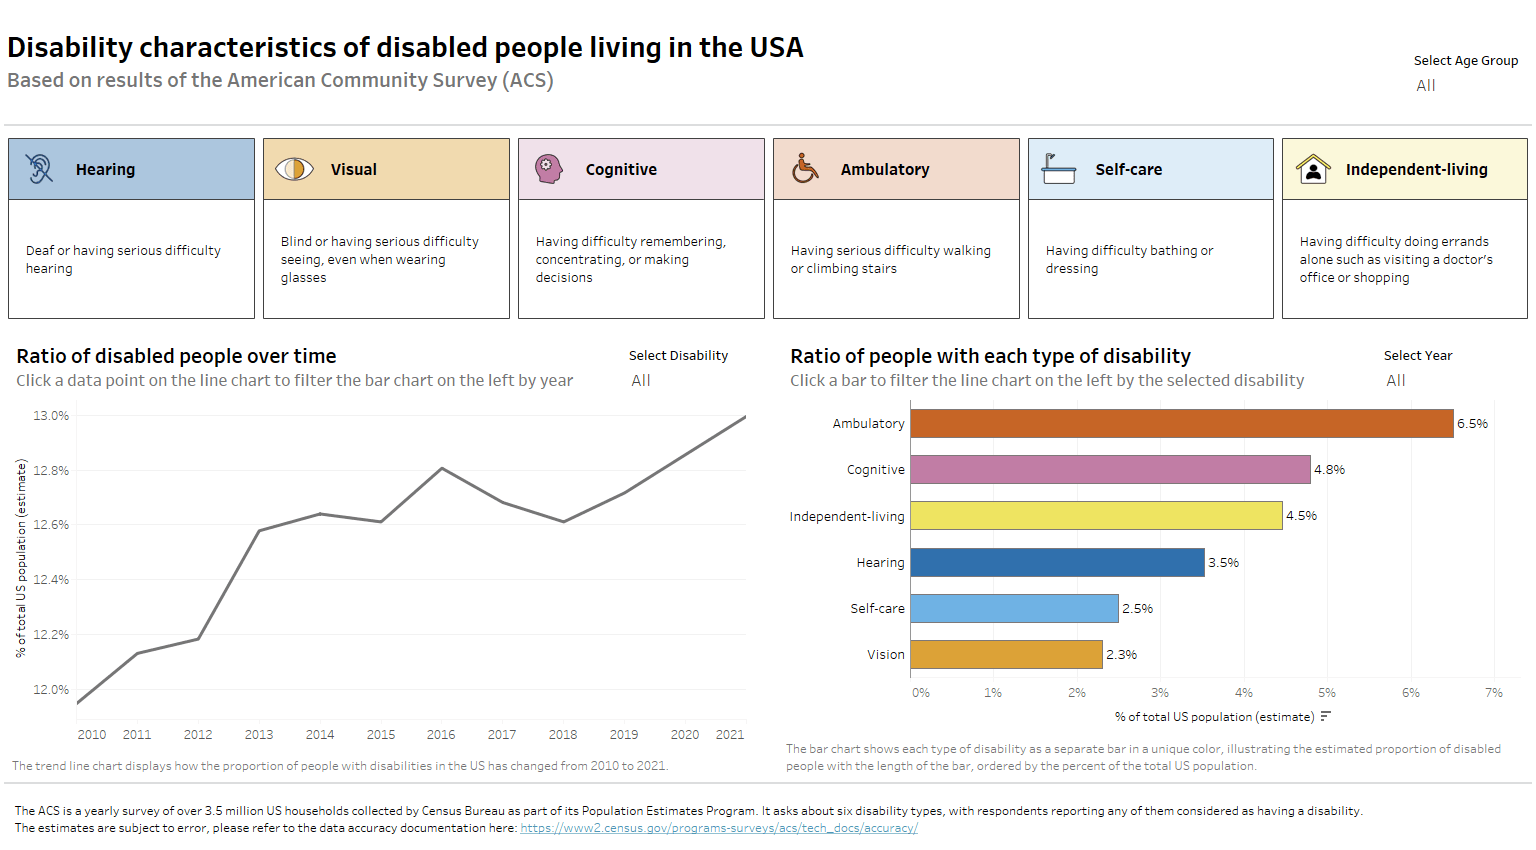 A dashboard about the disability characteristics of people with disabilities living in the USA. The dashboard is nicely formatted but feels cluttered as there isn't adequate white space between its elements.